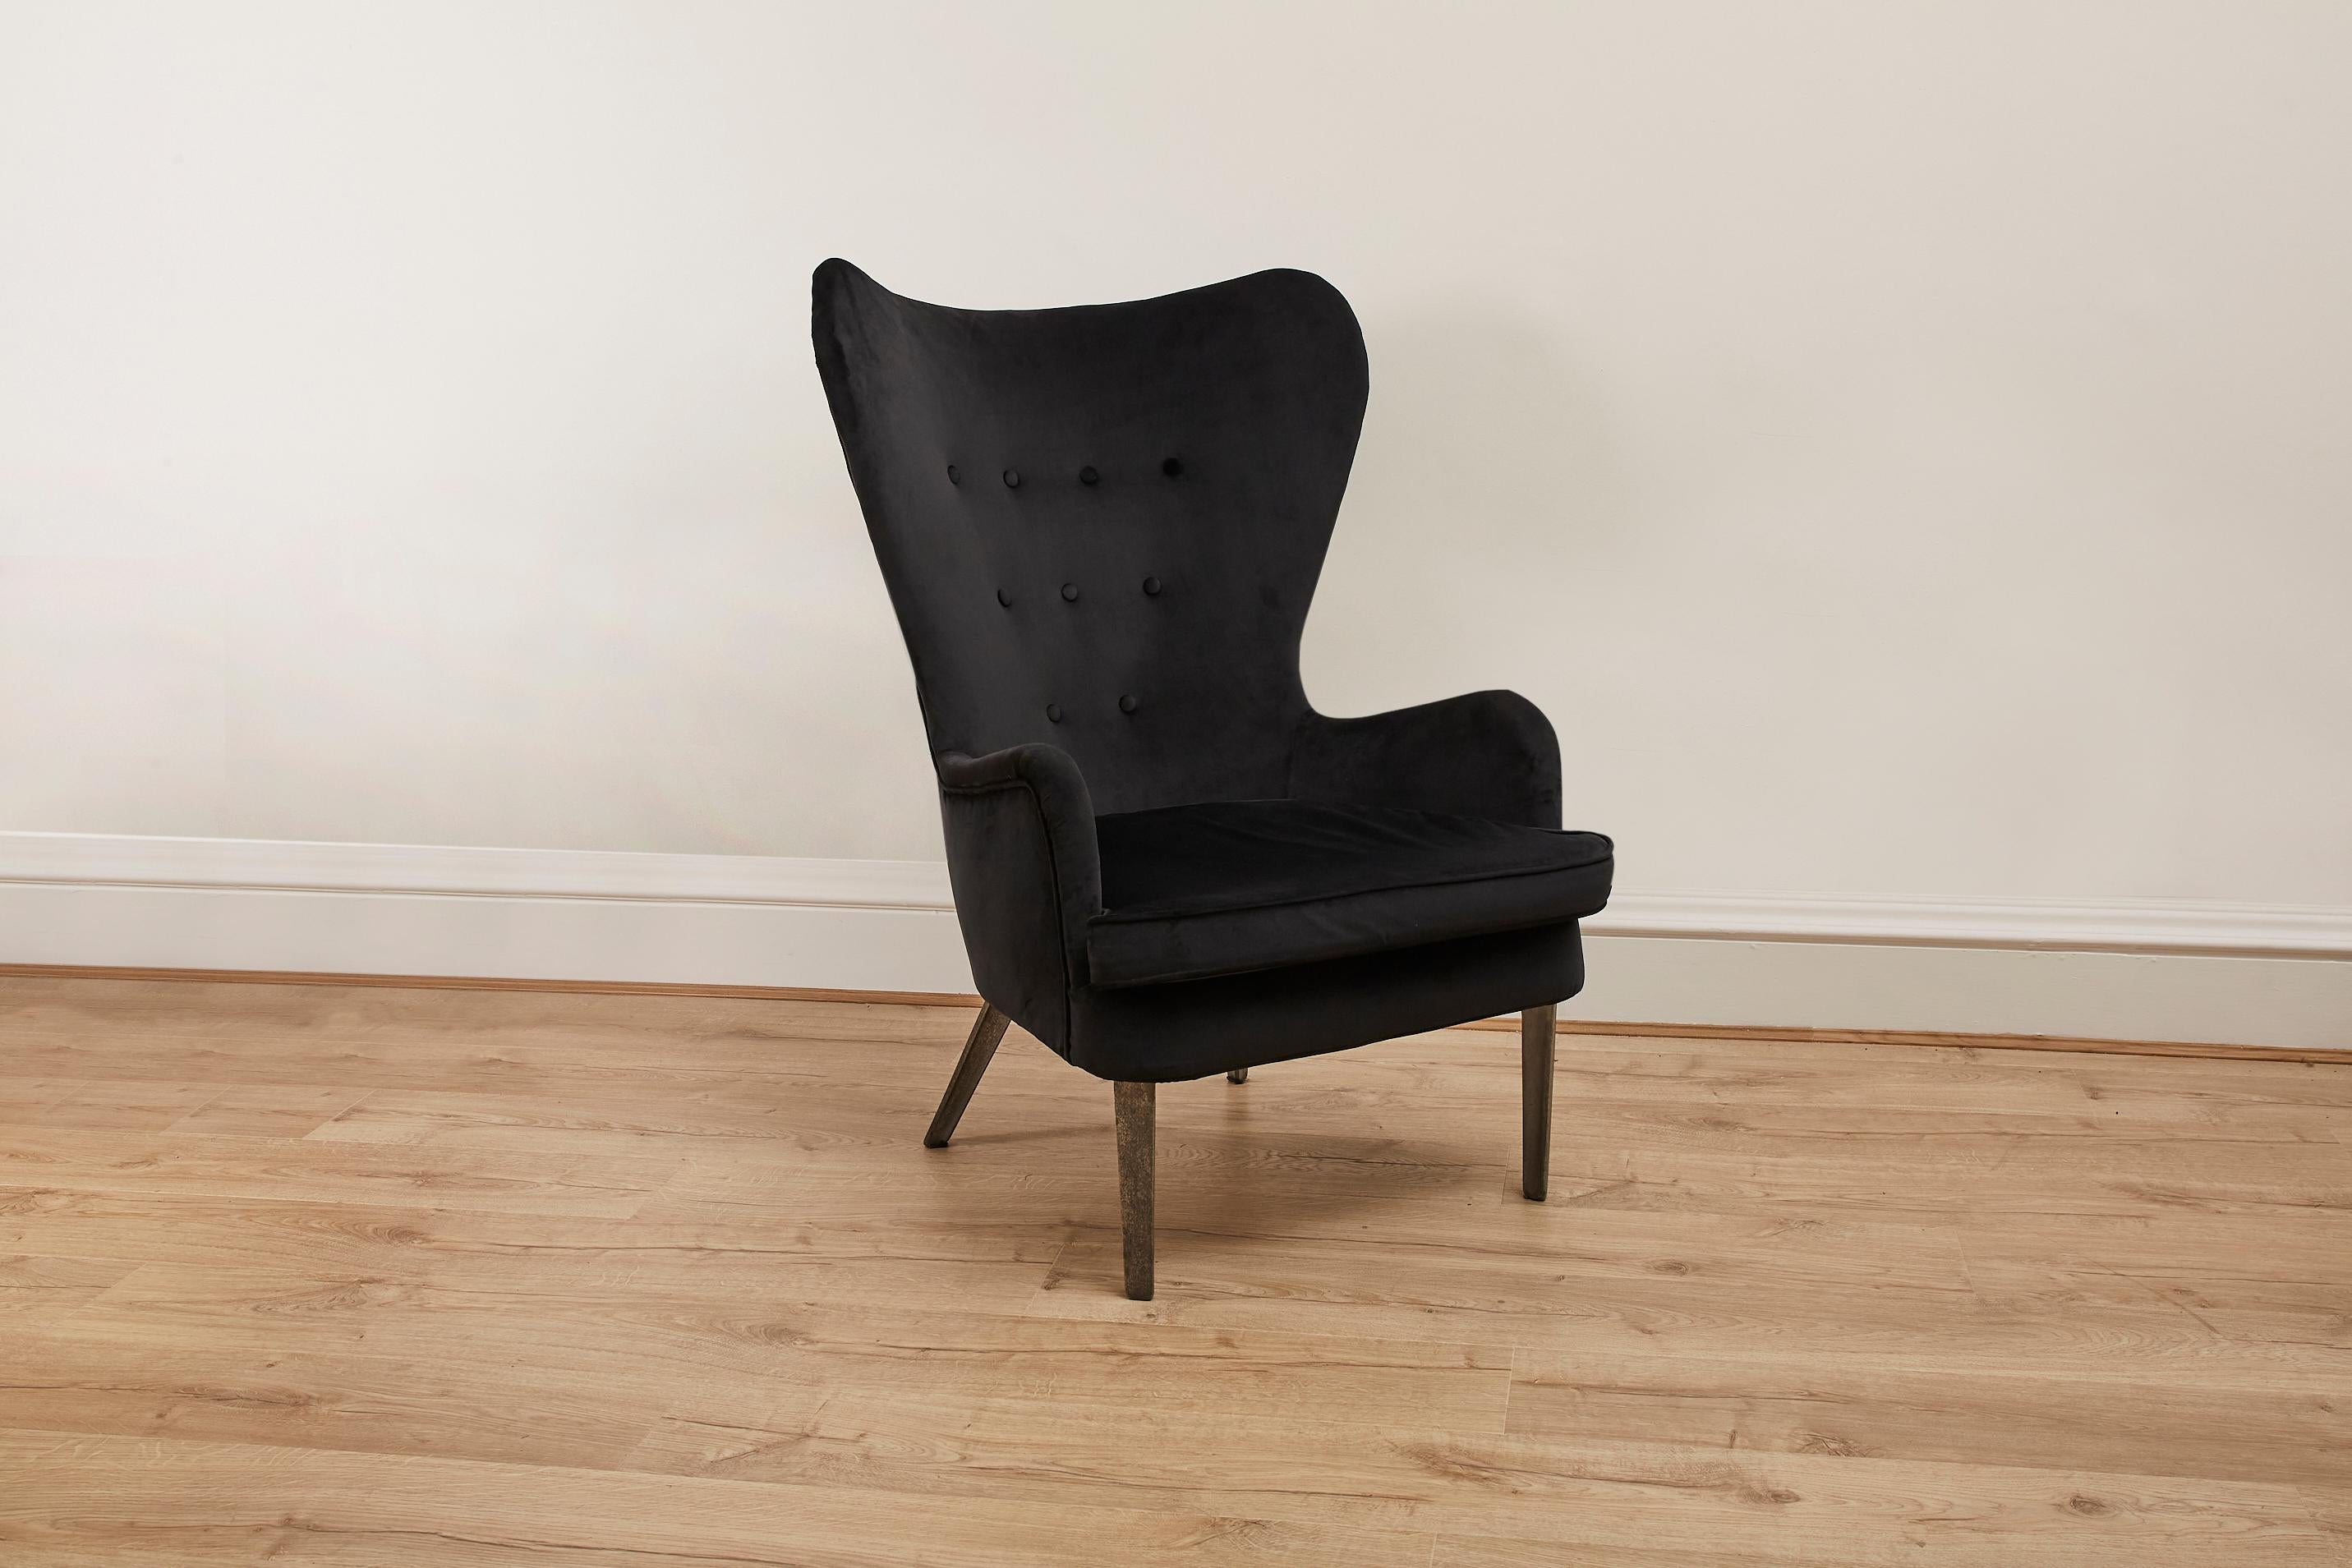 Vintage 'DA 1' armchair by Ernest Race for Race Furniture, Circa 1946. - England.

Rare 1st production, with aluminium legs & coil spring seat newly upholstered in black velvet. 

About the designer: 
Ernest Race (1913-1964) Probably the most